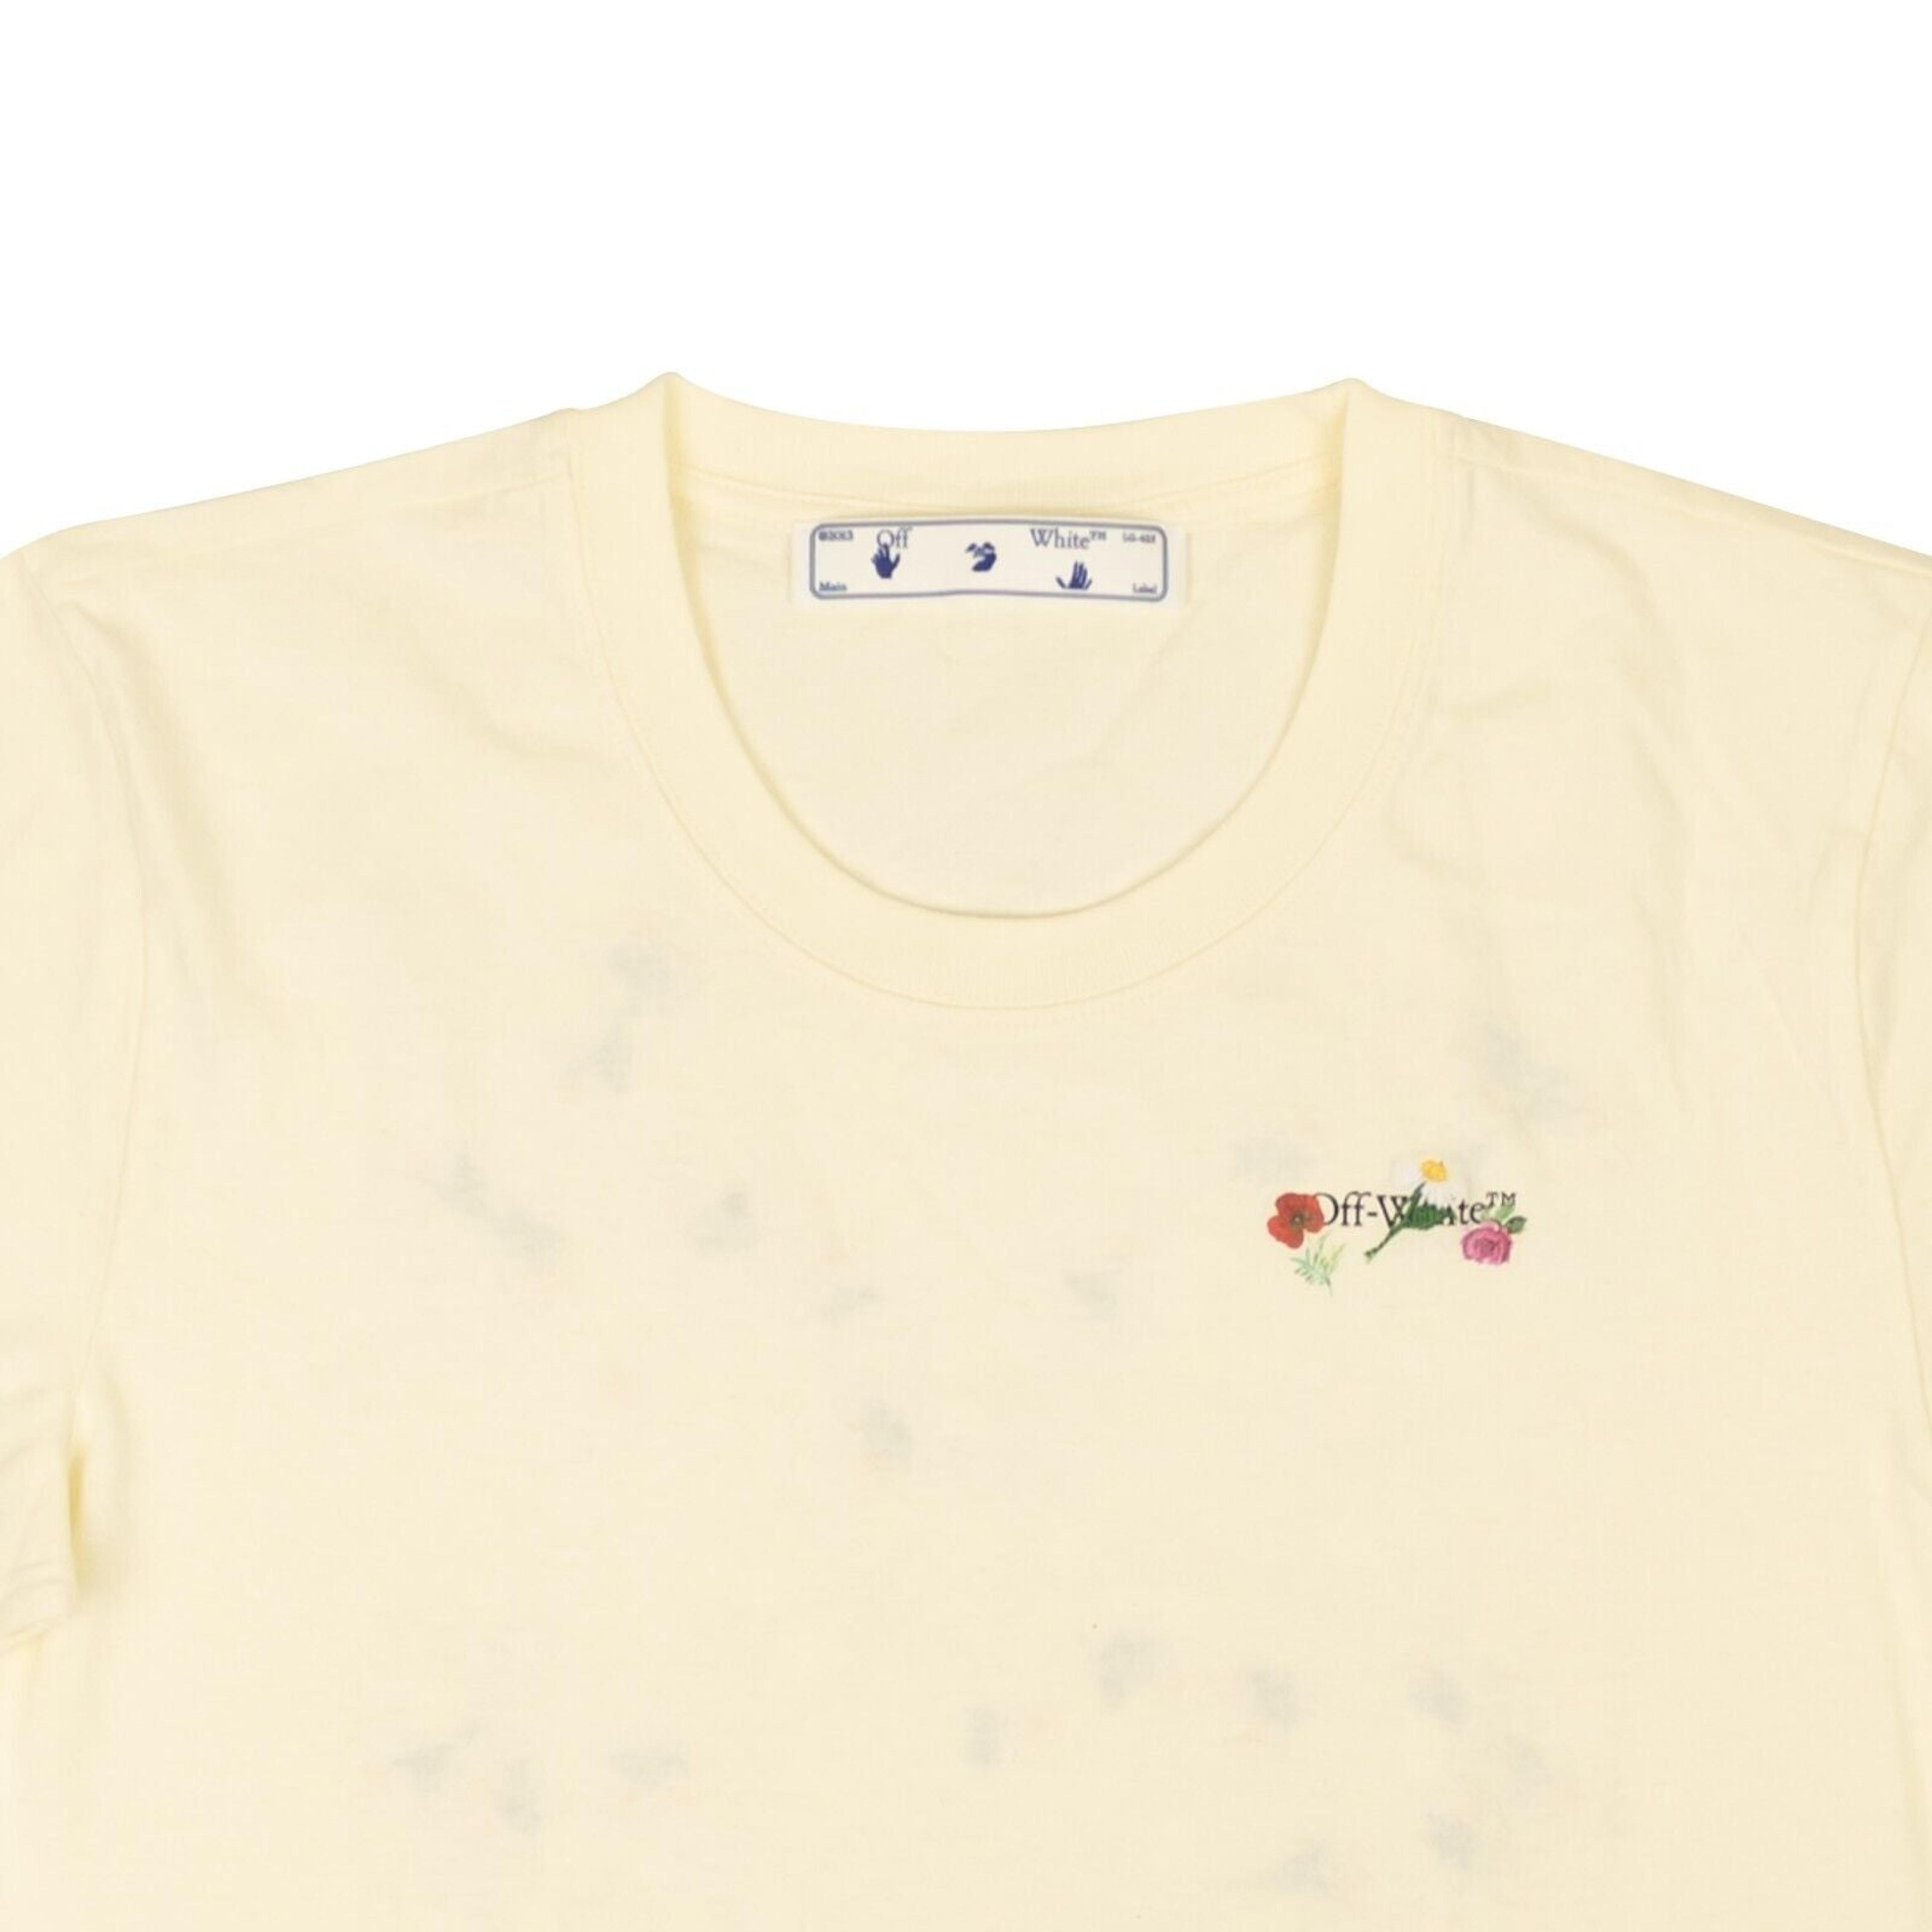 Alternate View 1 of Cream Floral Embroidered T-Shirt